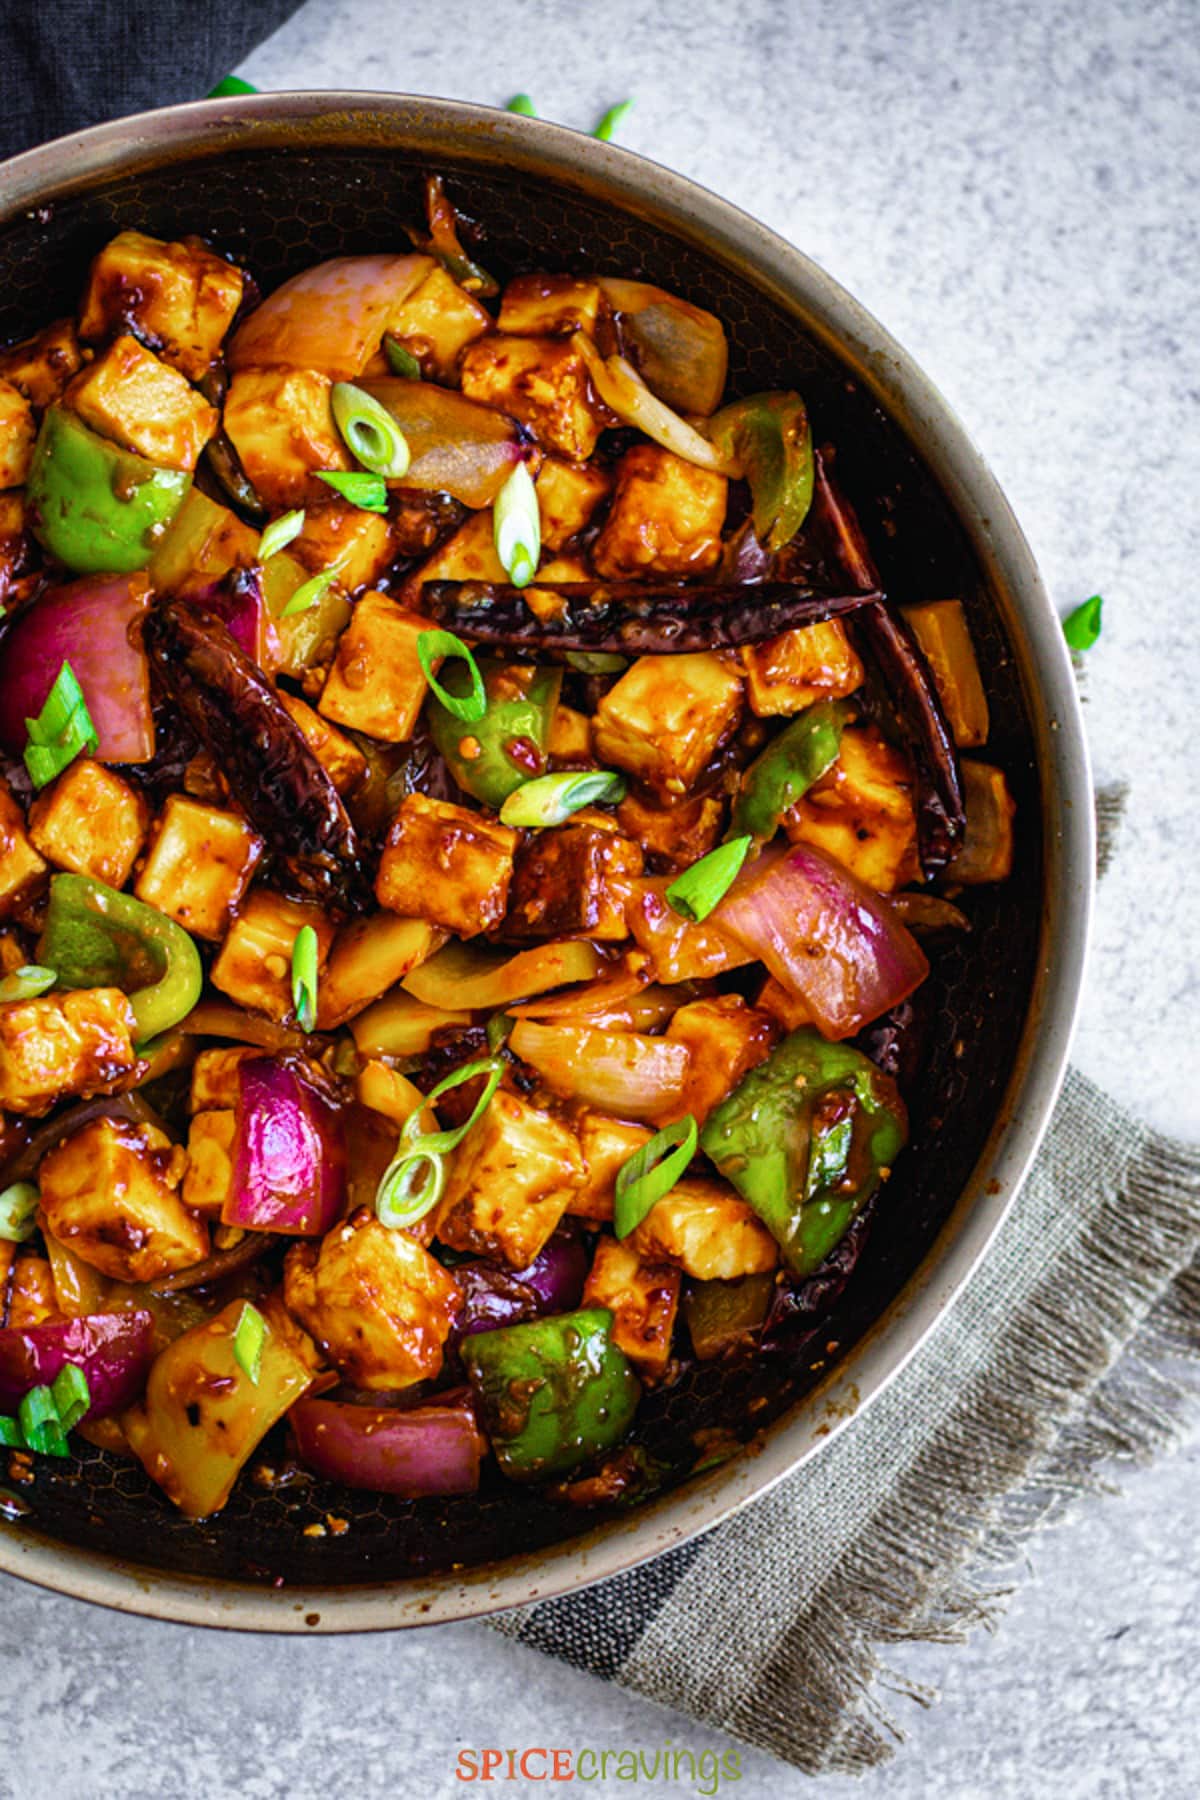 crispy chilli paneer recipe in stainless steel skillet with gray towel